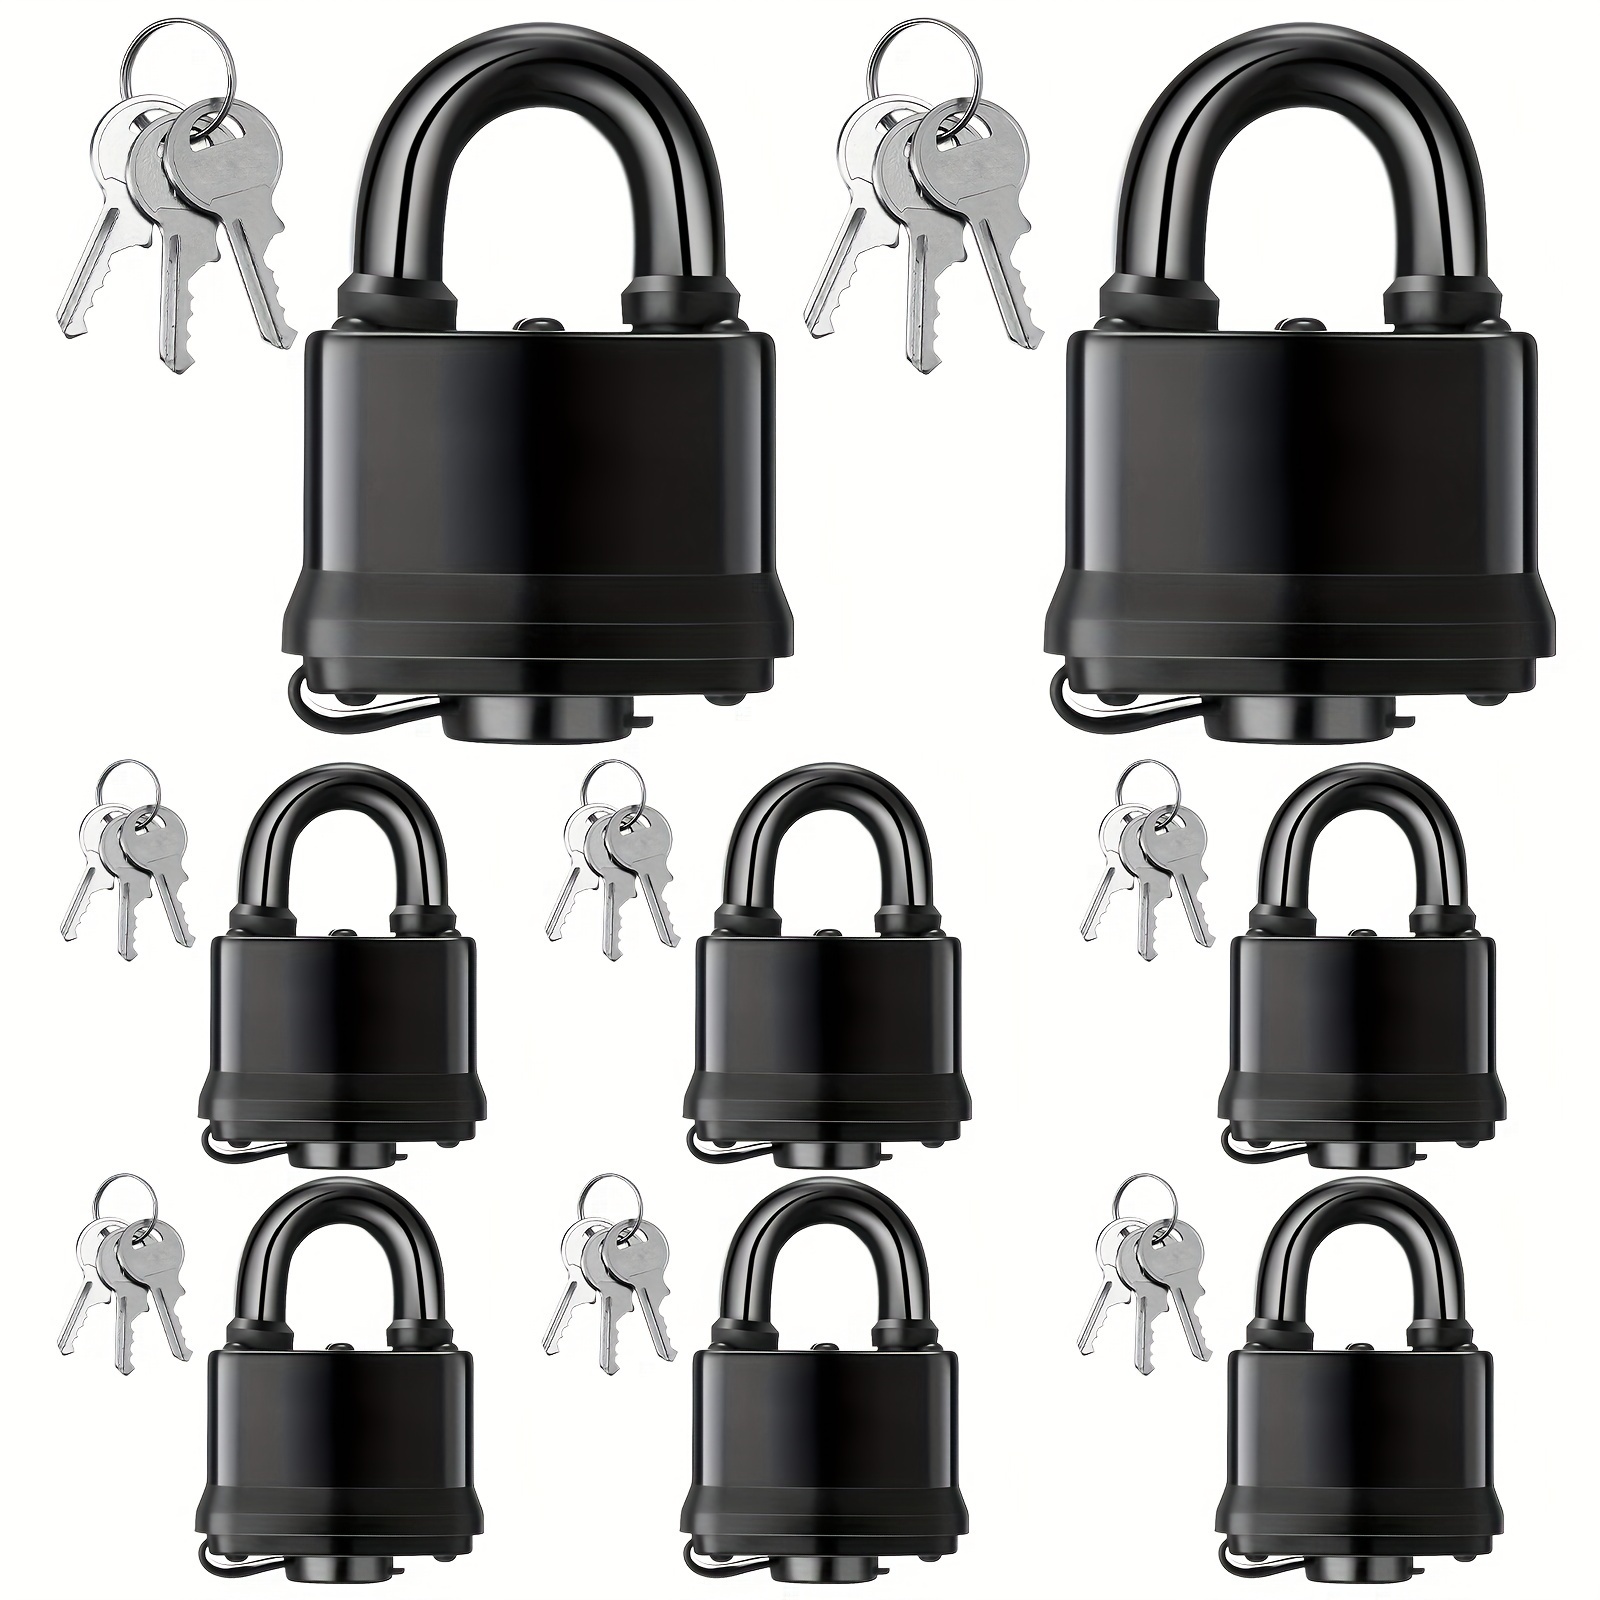 

8 Pcs Waterproof Padlocks With Keyed Outdoor Covered Heavy Duty Laminated Steel Wide Long Pad Lock 2.32 Inch Black Weather Proof Padlock Set Pvc Tagout Lock For Garage, Fence, Shed, Yard